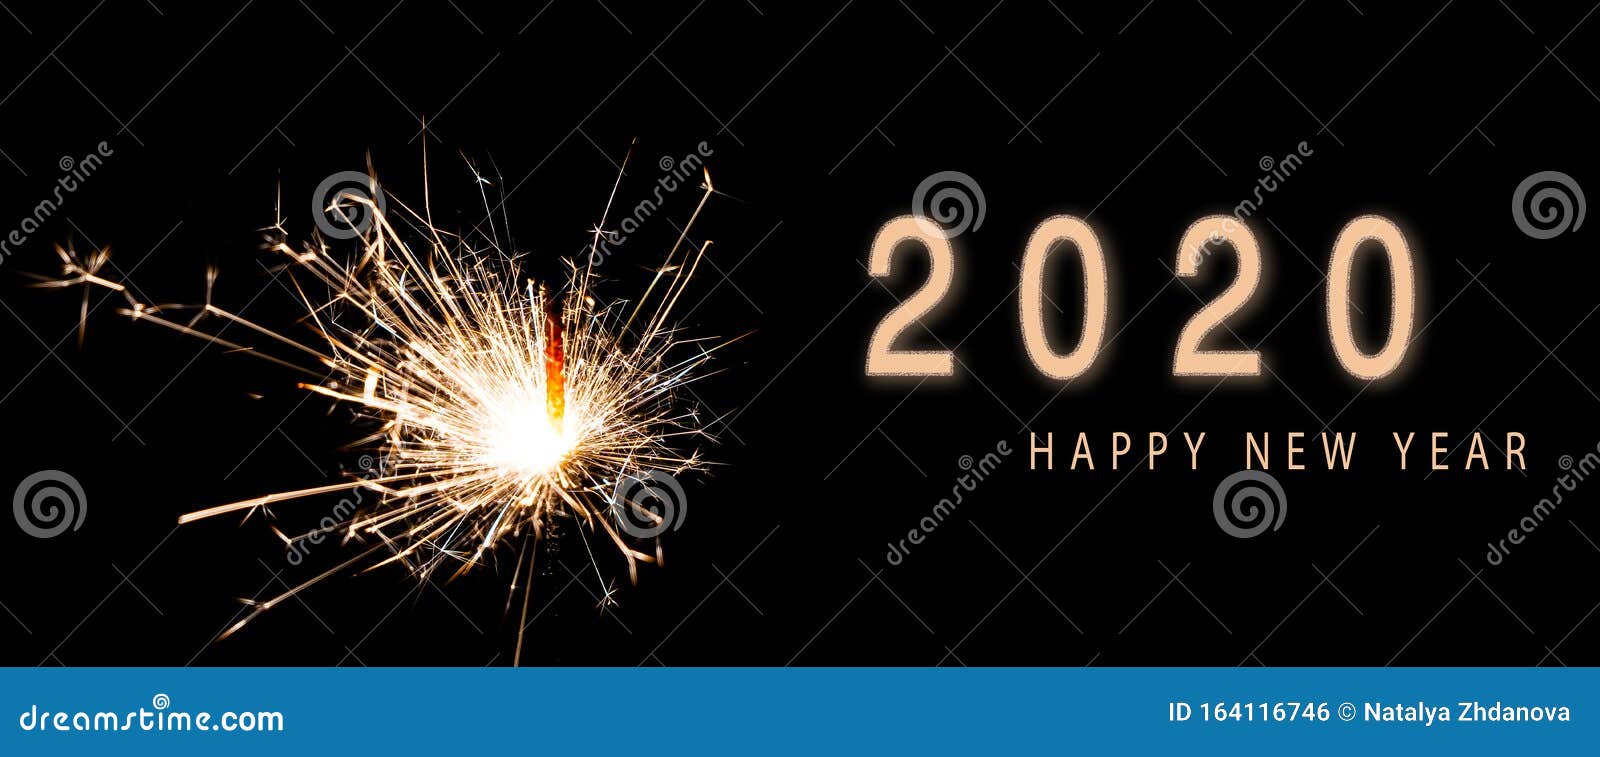 Holiday Banner Happy New Year 2020. Stock Photo - Image of 2020 ...